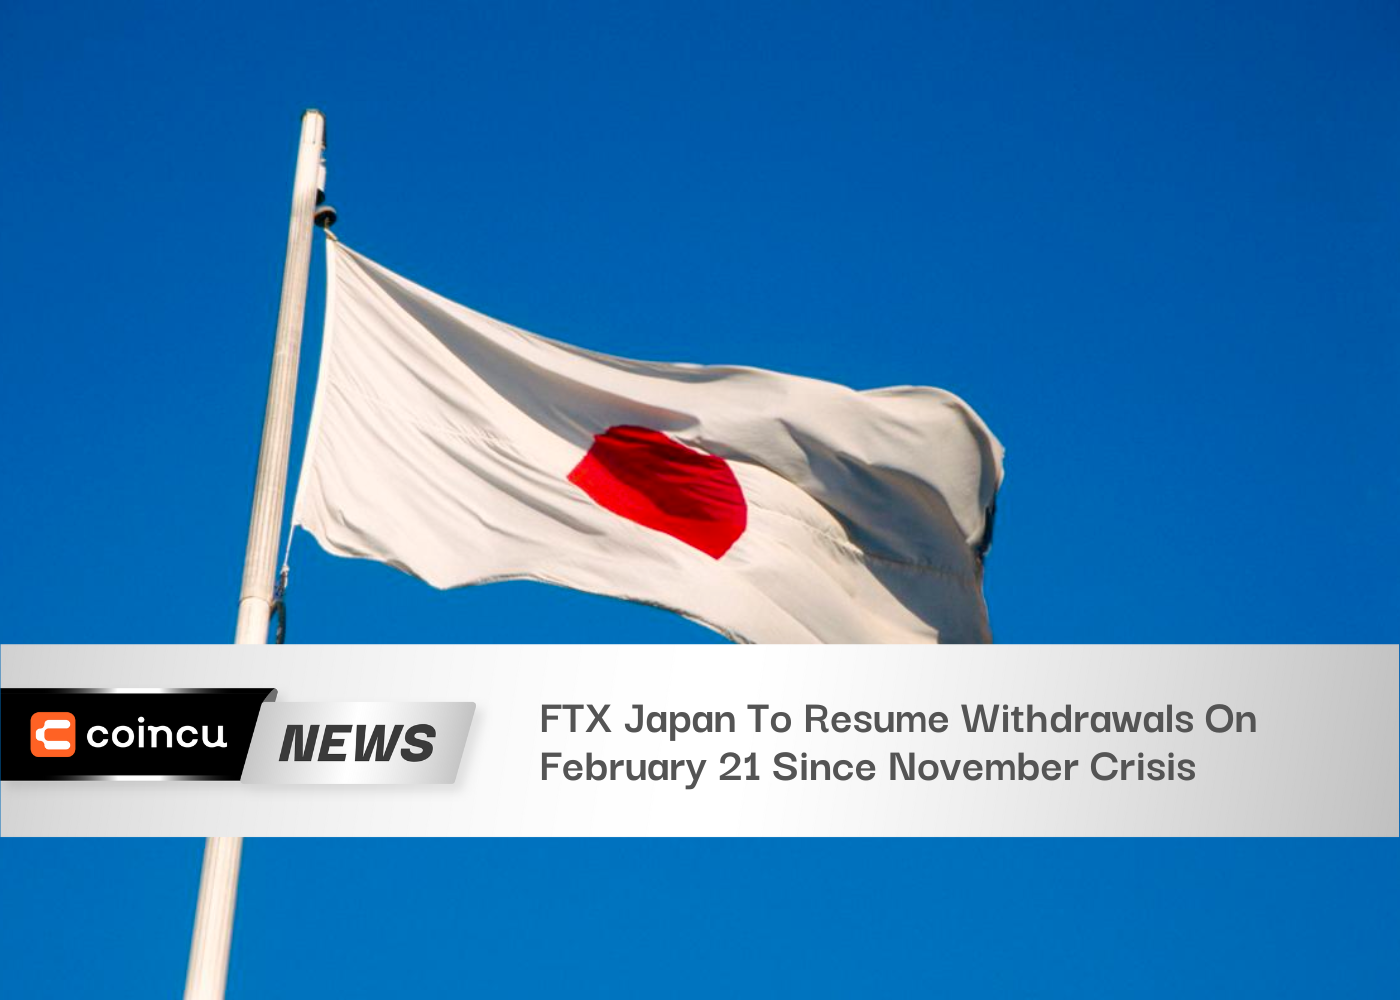 FTX Japan To Resume Withdrawals On February 21 Since November Crisis